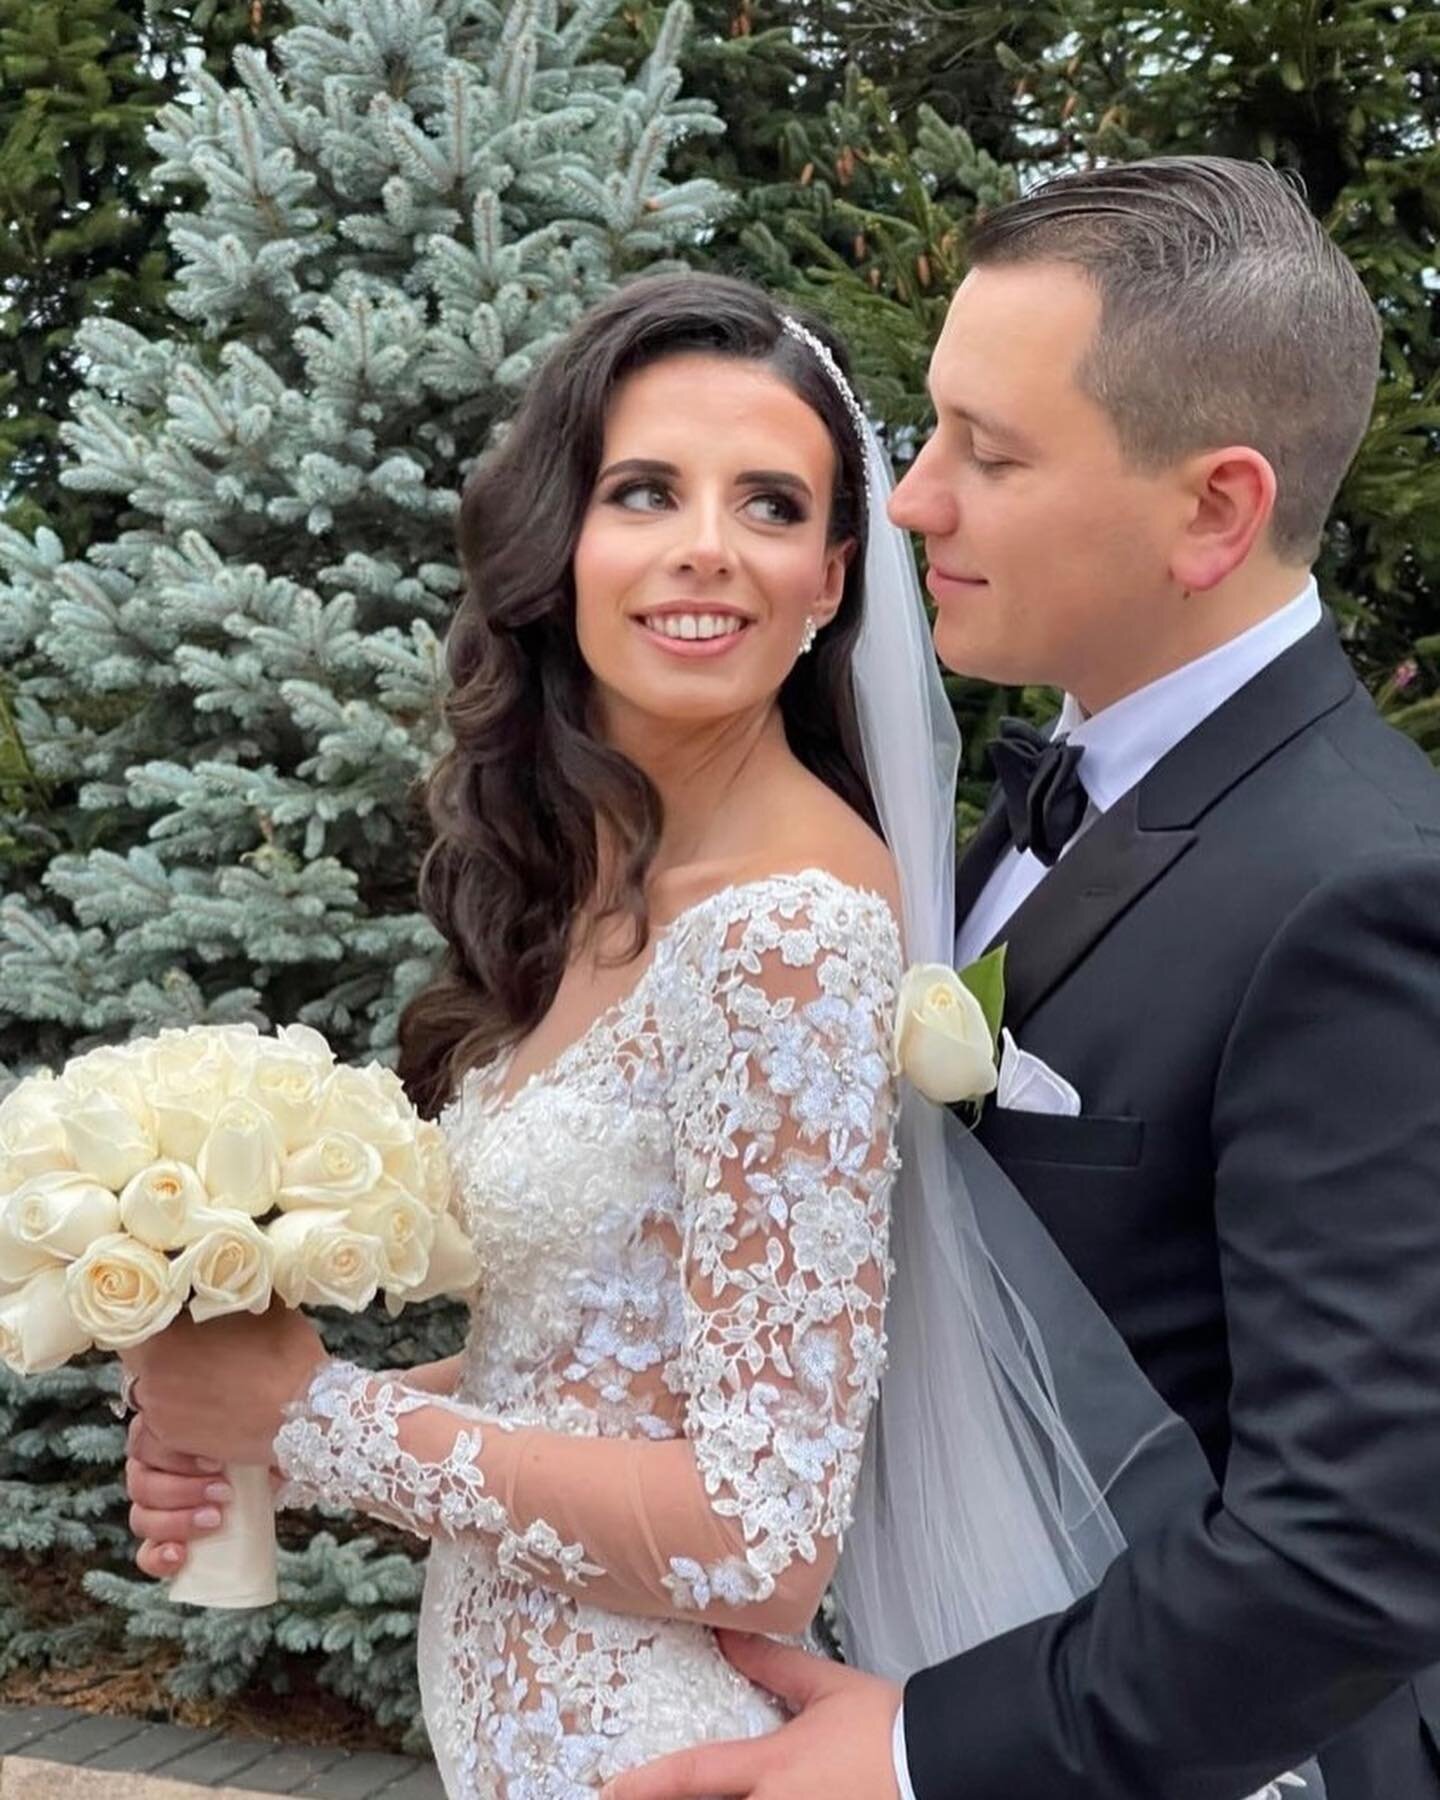 And she&rsquo;s married!! Congratulations to our hygienist Rebecca and her husband Anthony!! #decemberbride #gorgeous #beauty #pearlywhites #hollywoodsmiles #npdfam @rebecca_michelle @antpeterpaul